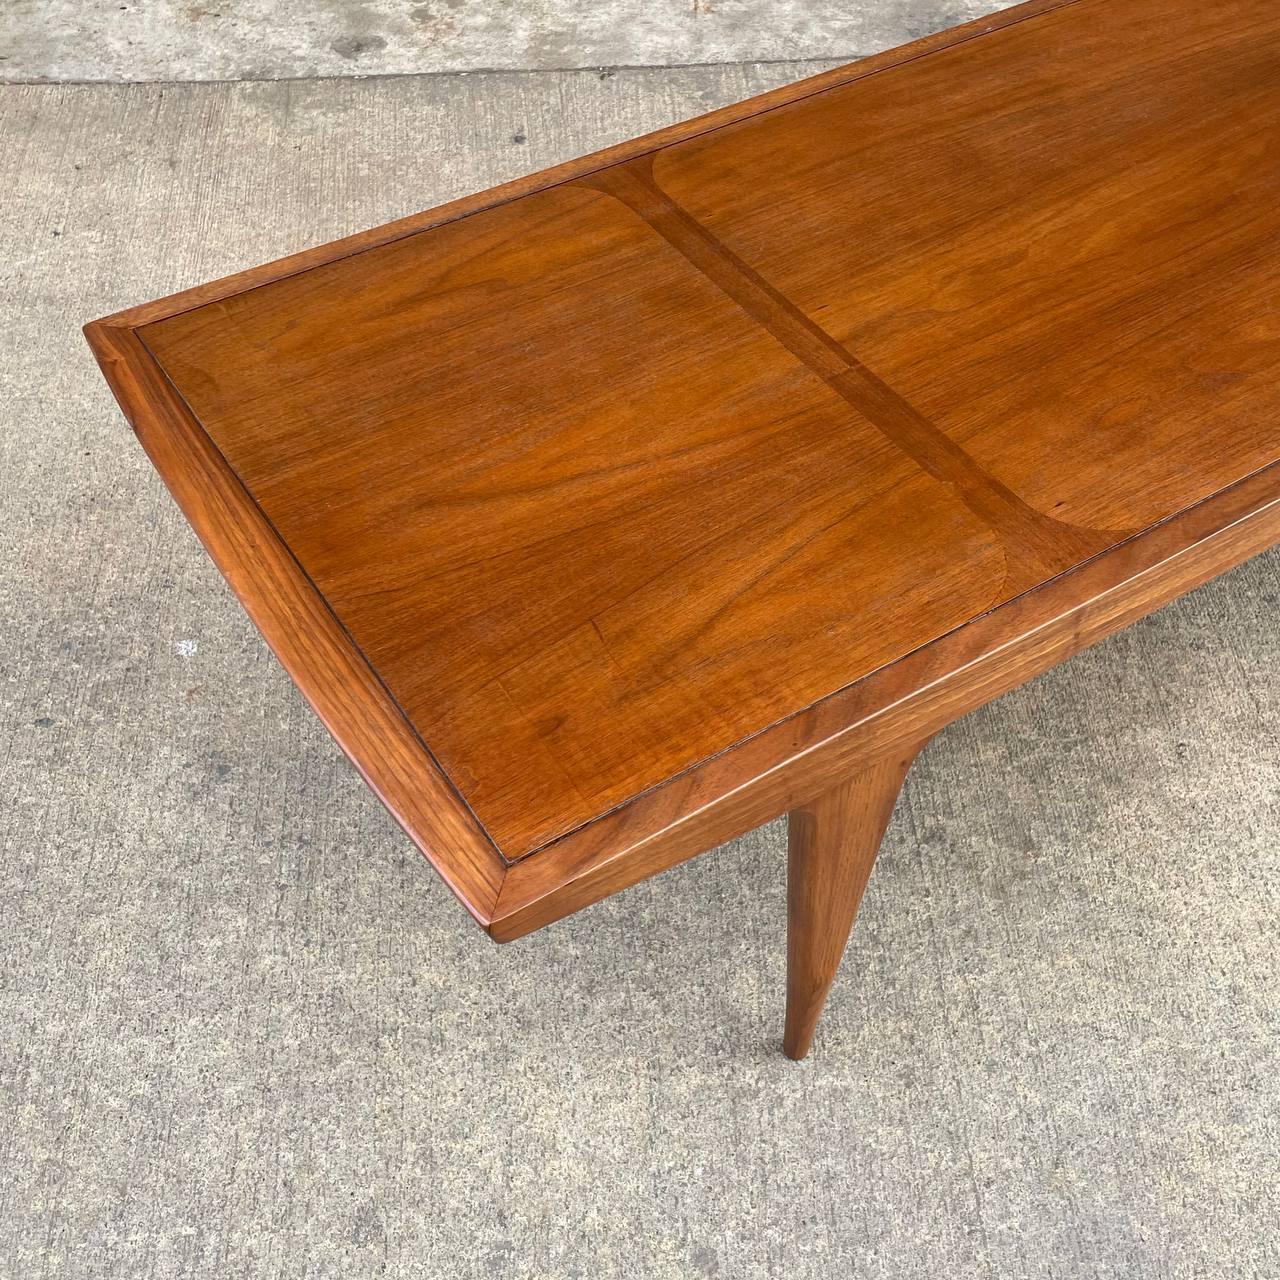 Mid-20th Century Newly Refinished - Mid-Century Modern Sculpted Walnut Coffee Table For Sale